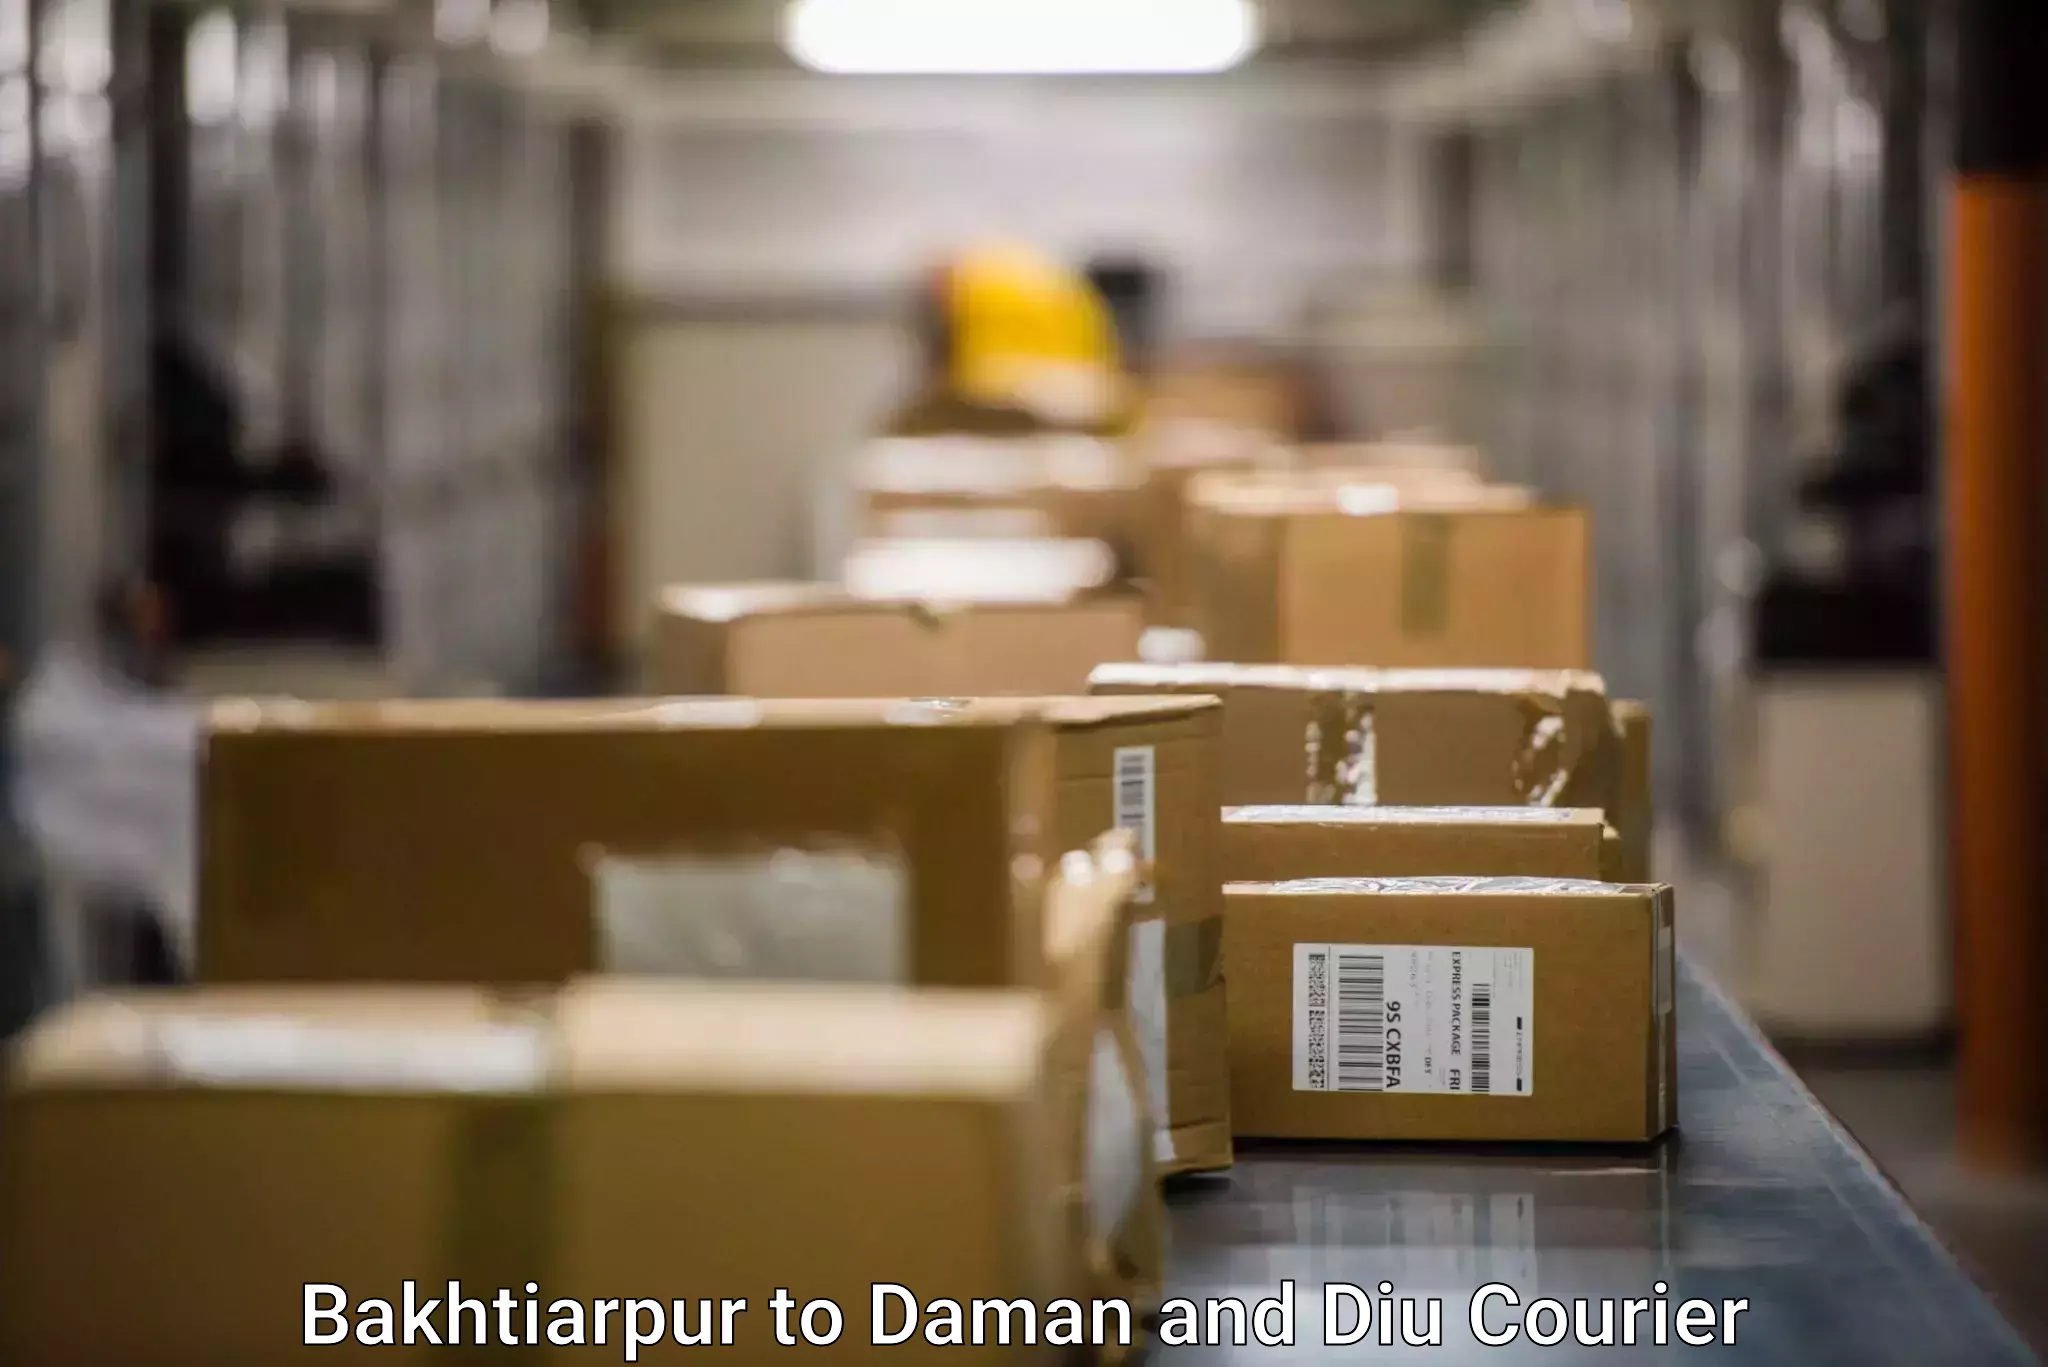 Fast-track shipping solutions Bakhtiarpur to Daman and Diu